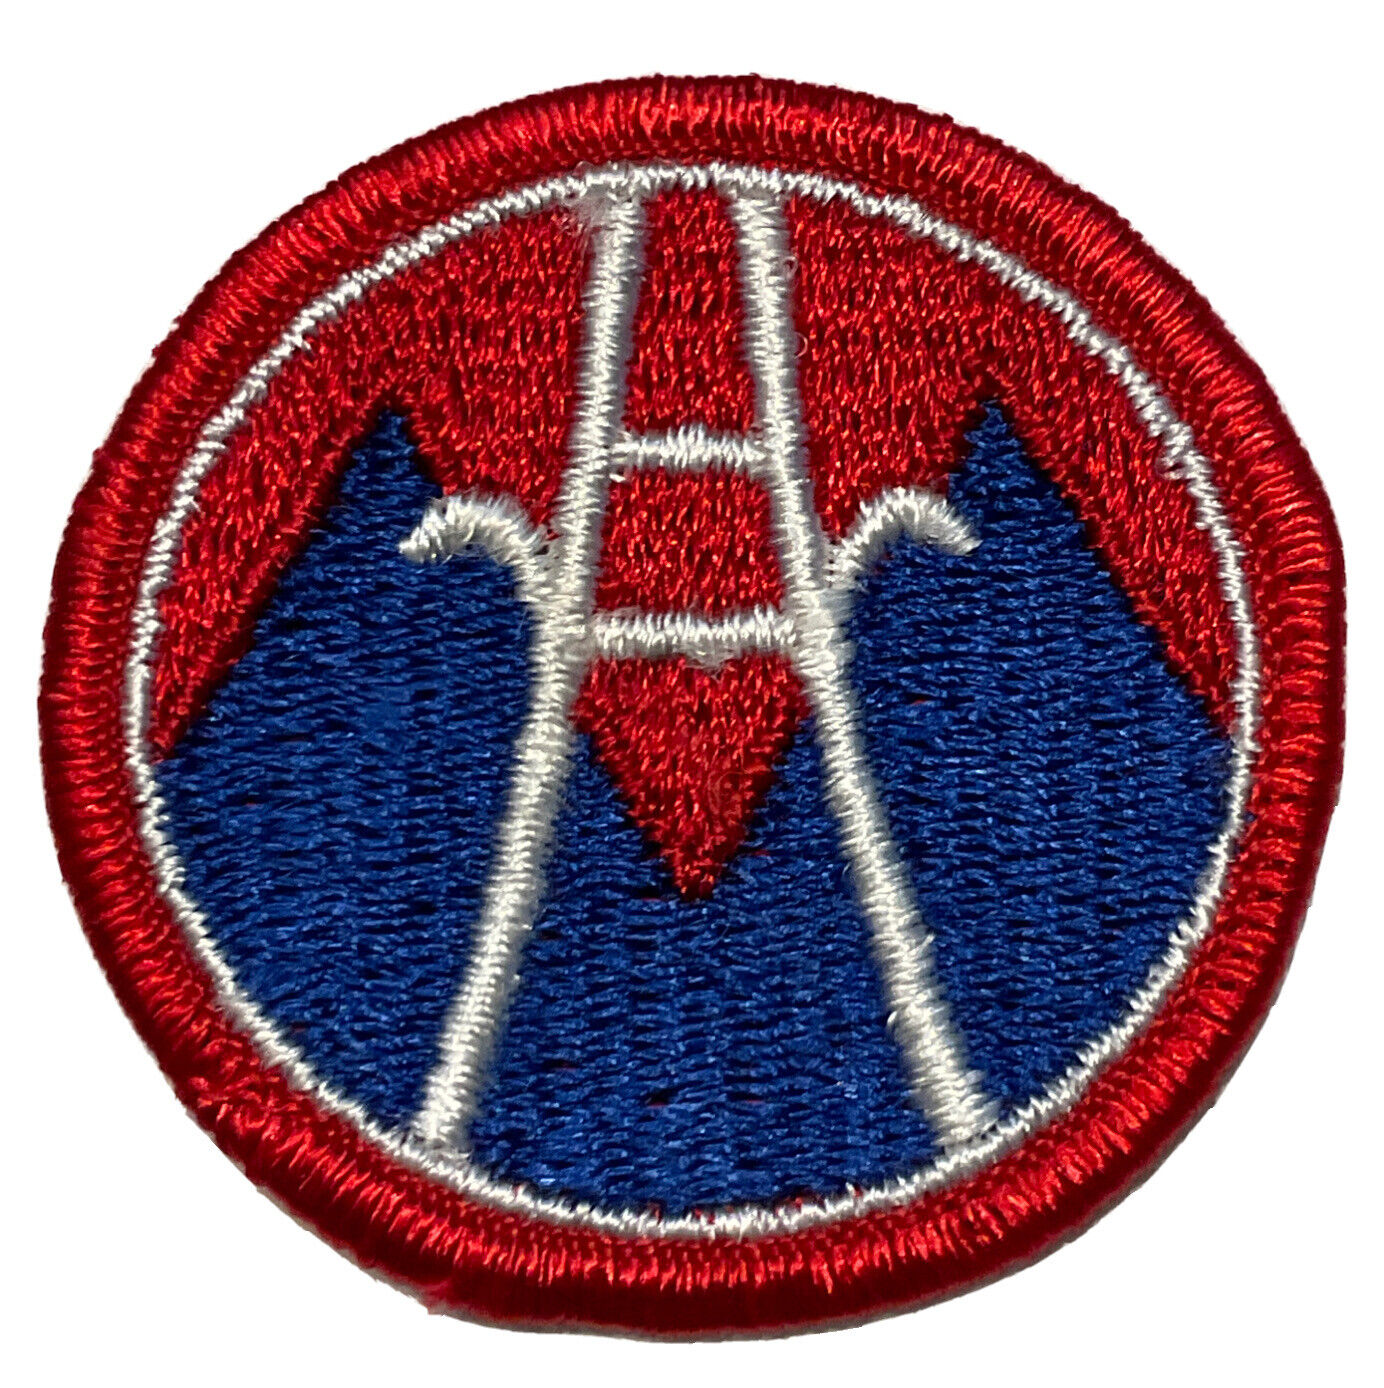 Original Post WWII 50\'s U.S. 2nd LOGISTICAL COMMAND MERROW EDGE FULL COLOR PATCH